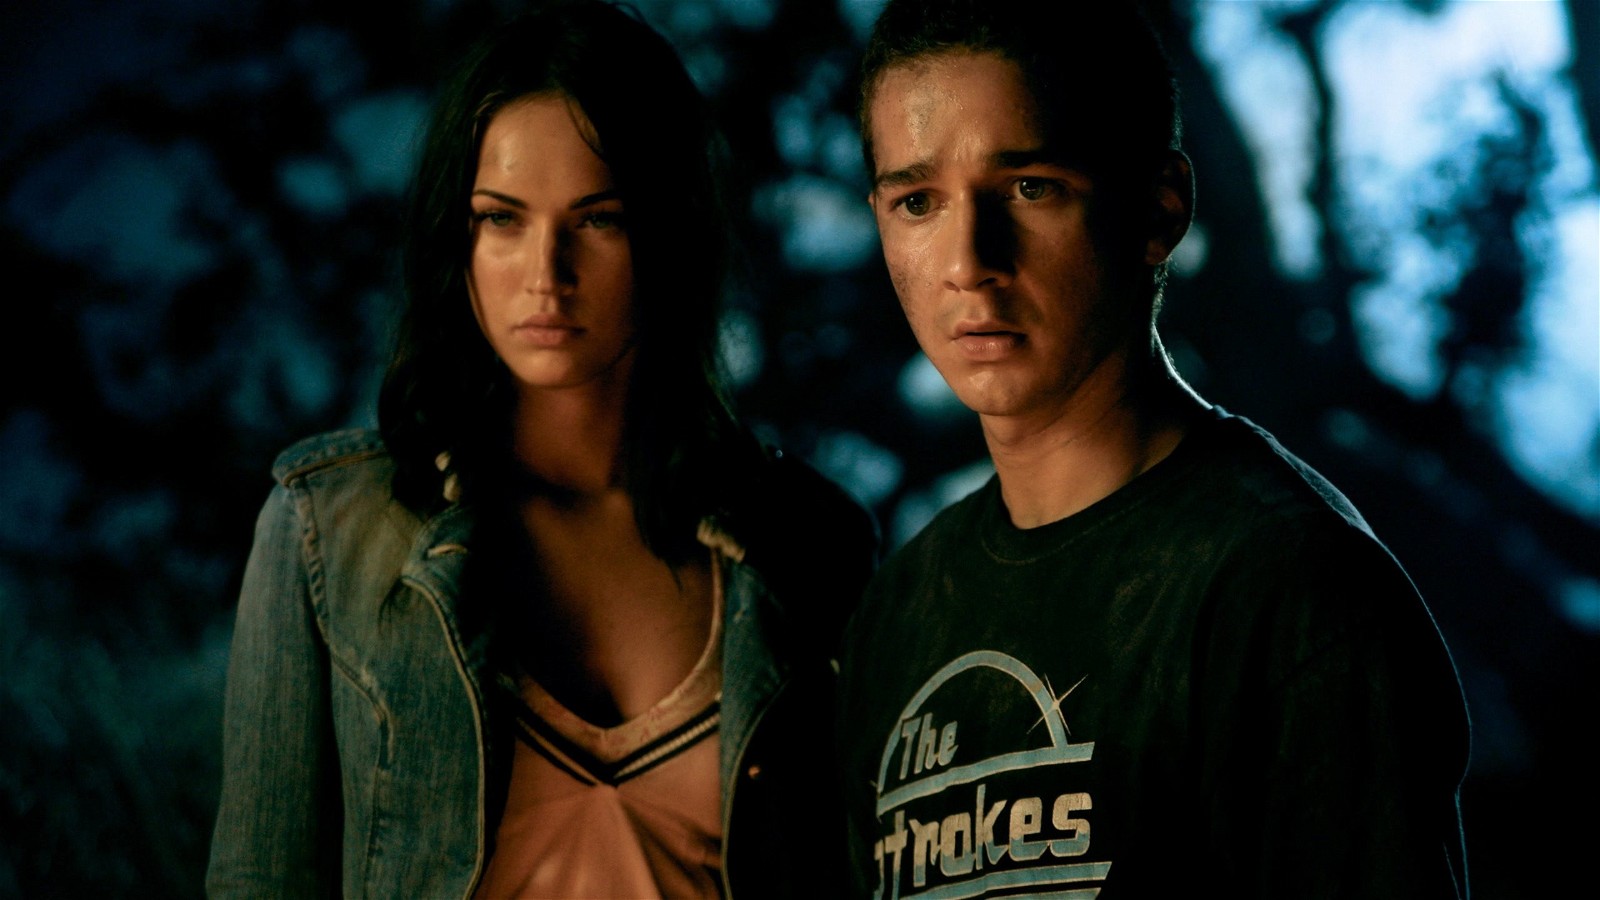 Shia LeBeouf and Megan Fox in a still from Transformers